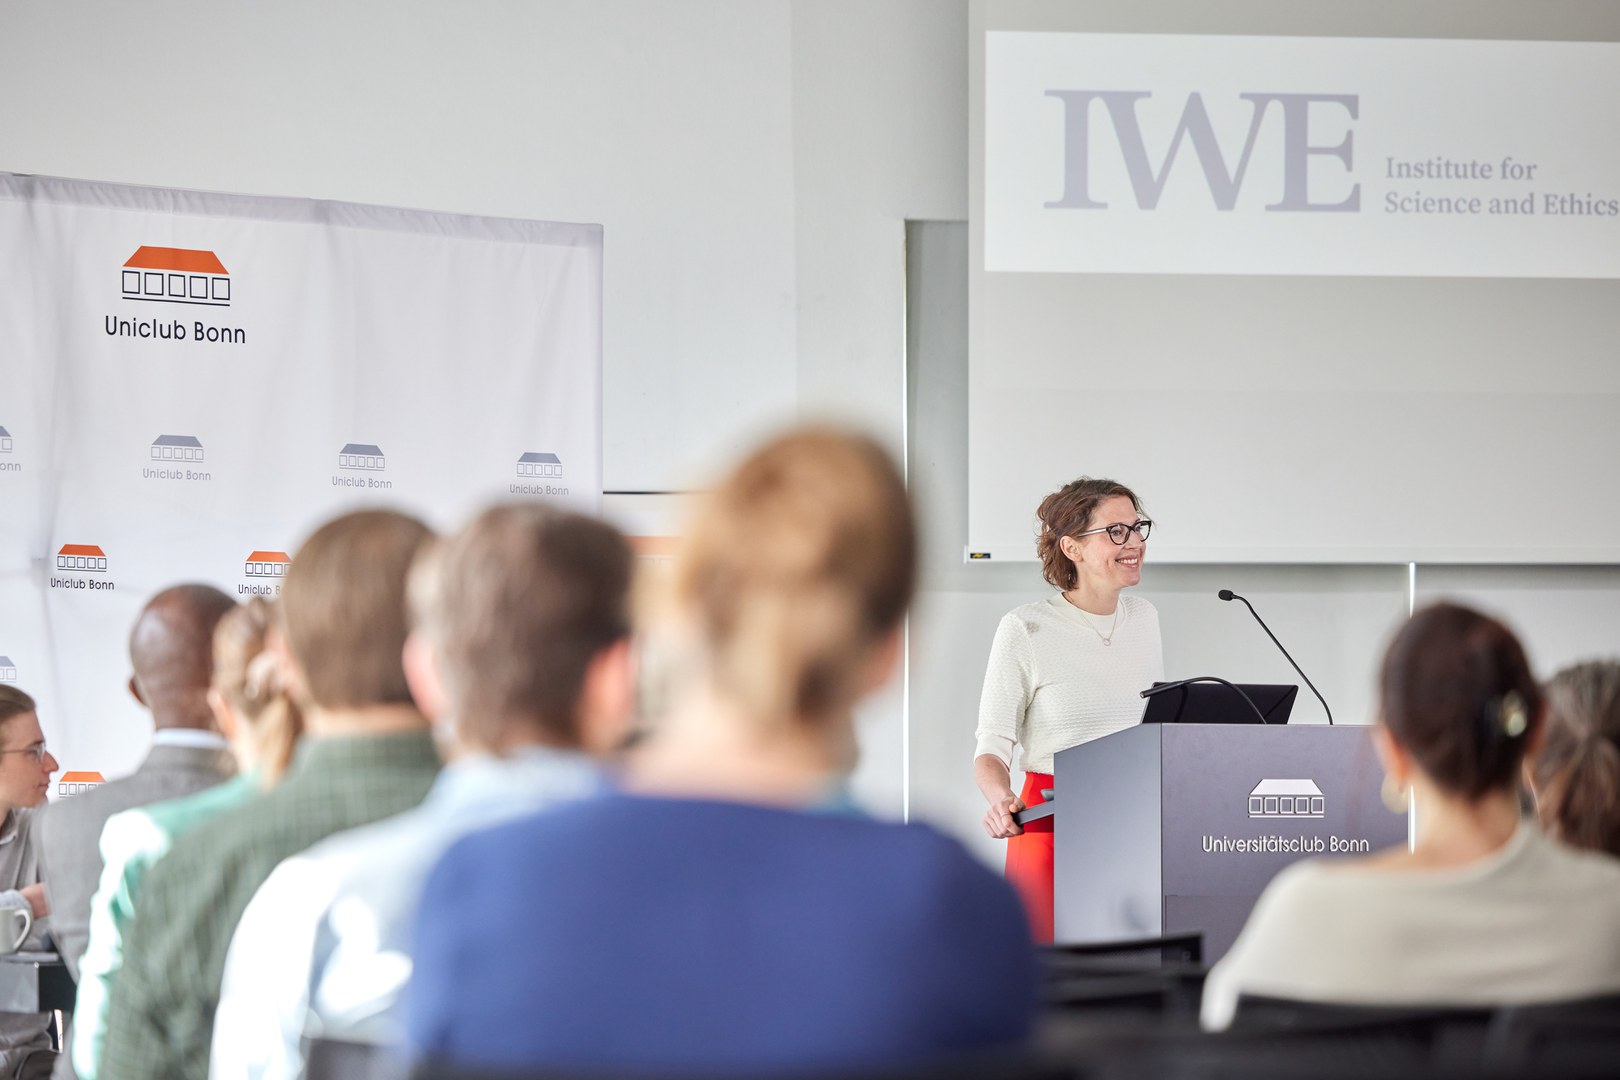 Humboldt Professor Aimee van Wynsberghe, director of the Bonn Sustainable AI Lab at the Institute of Science and Ethics (IWE), welcomed participants to the Universitätsclub Bonn.